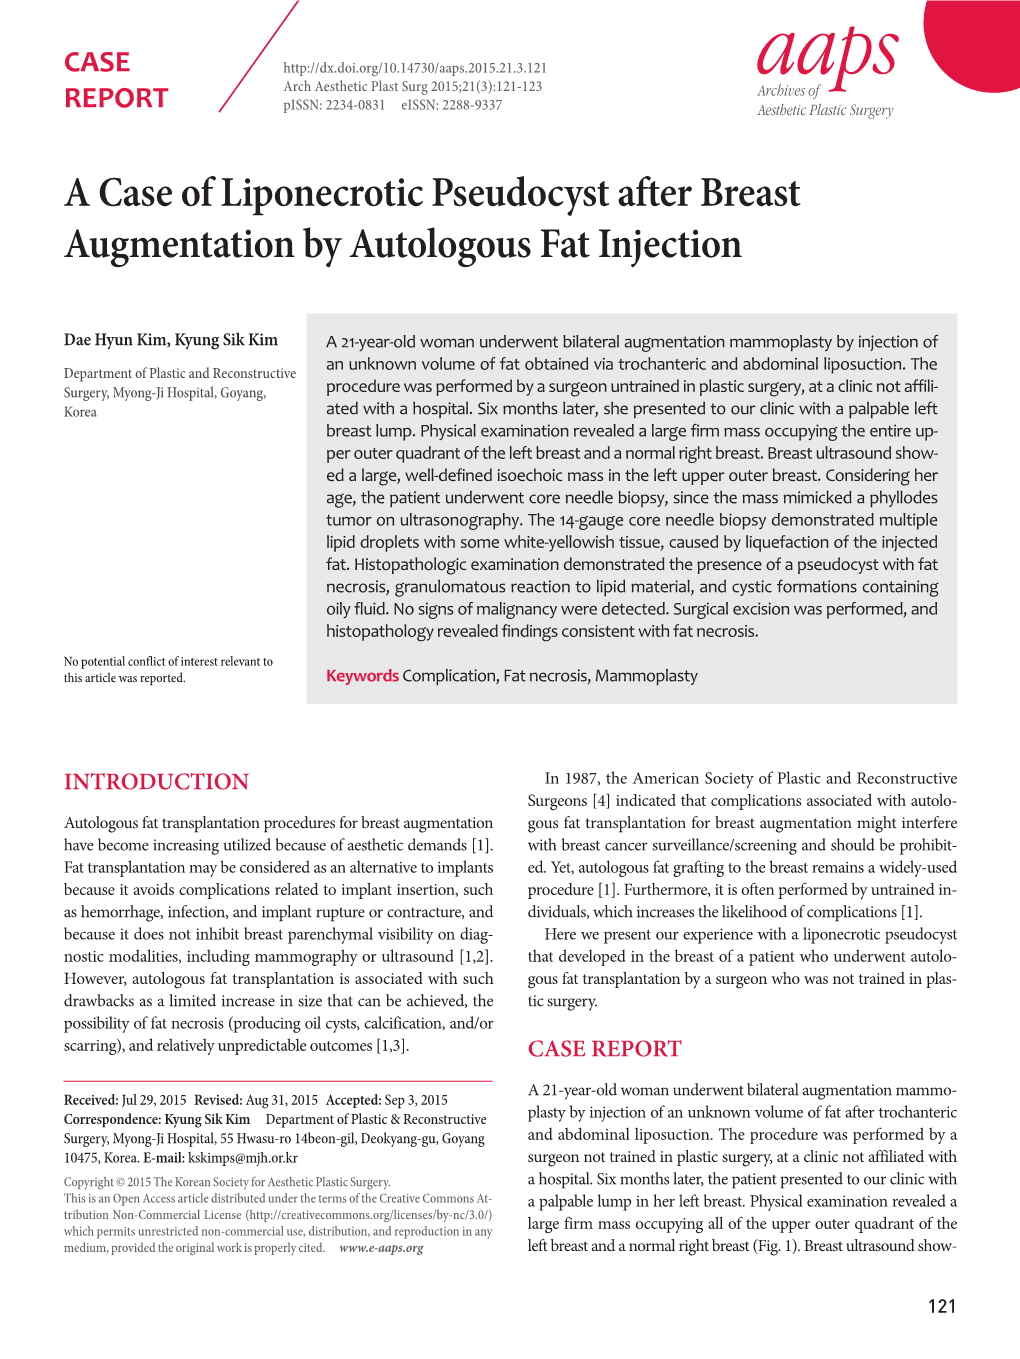 A Case of Liponecrotic Pseudocyst After Breast Augmentation by Autologous Fat Injection